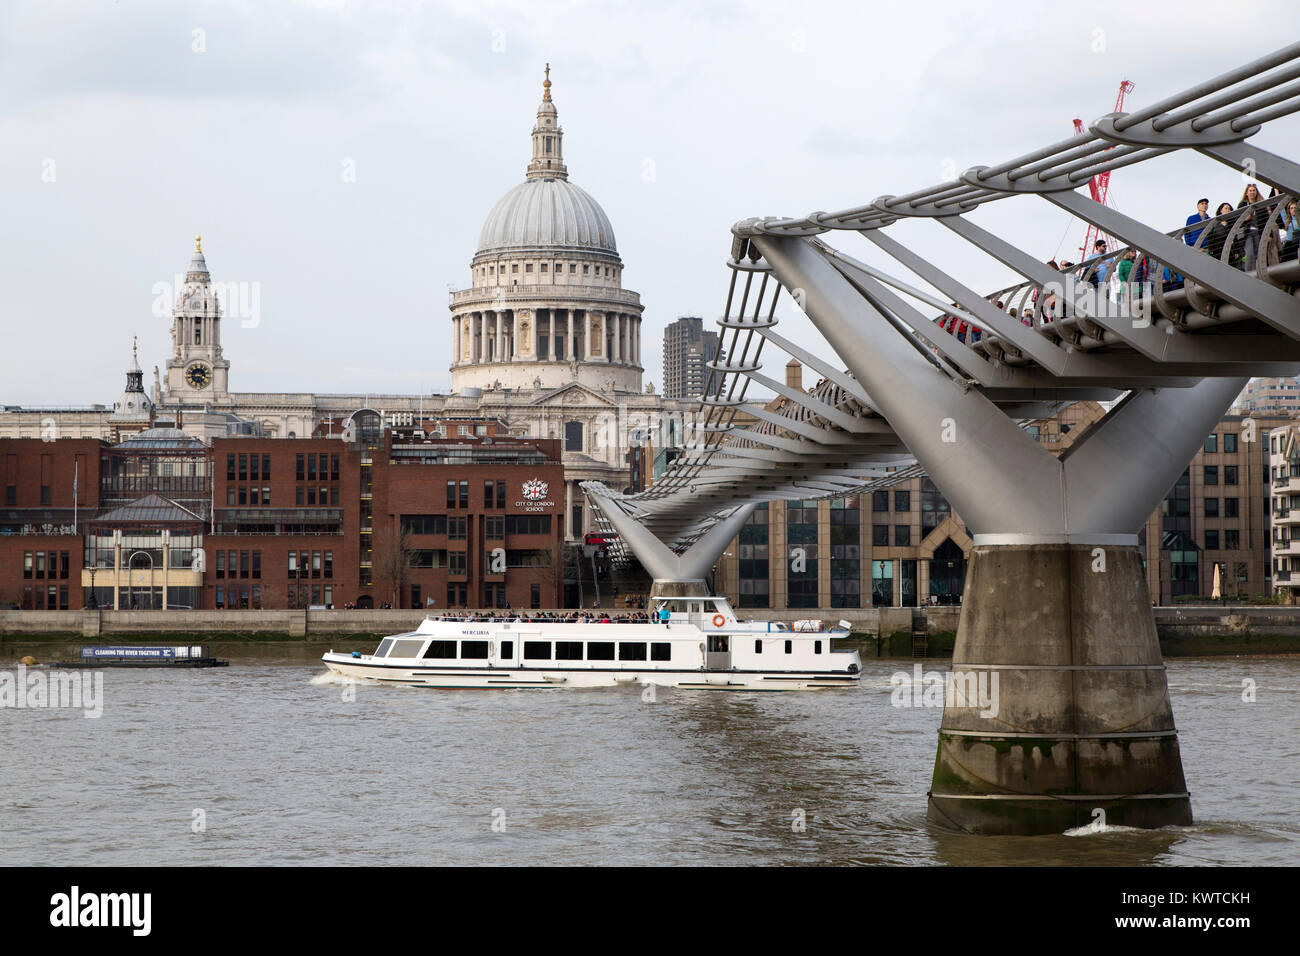 A river cruise ship sails under the Millennium Bridge on the River Thames in London, England. The dome of St Paul's Cathedral stands in the background Stock Photo